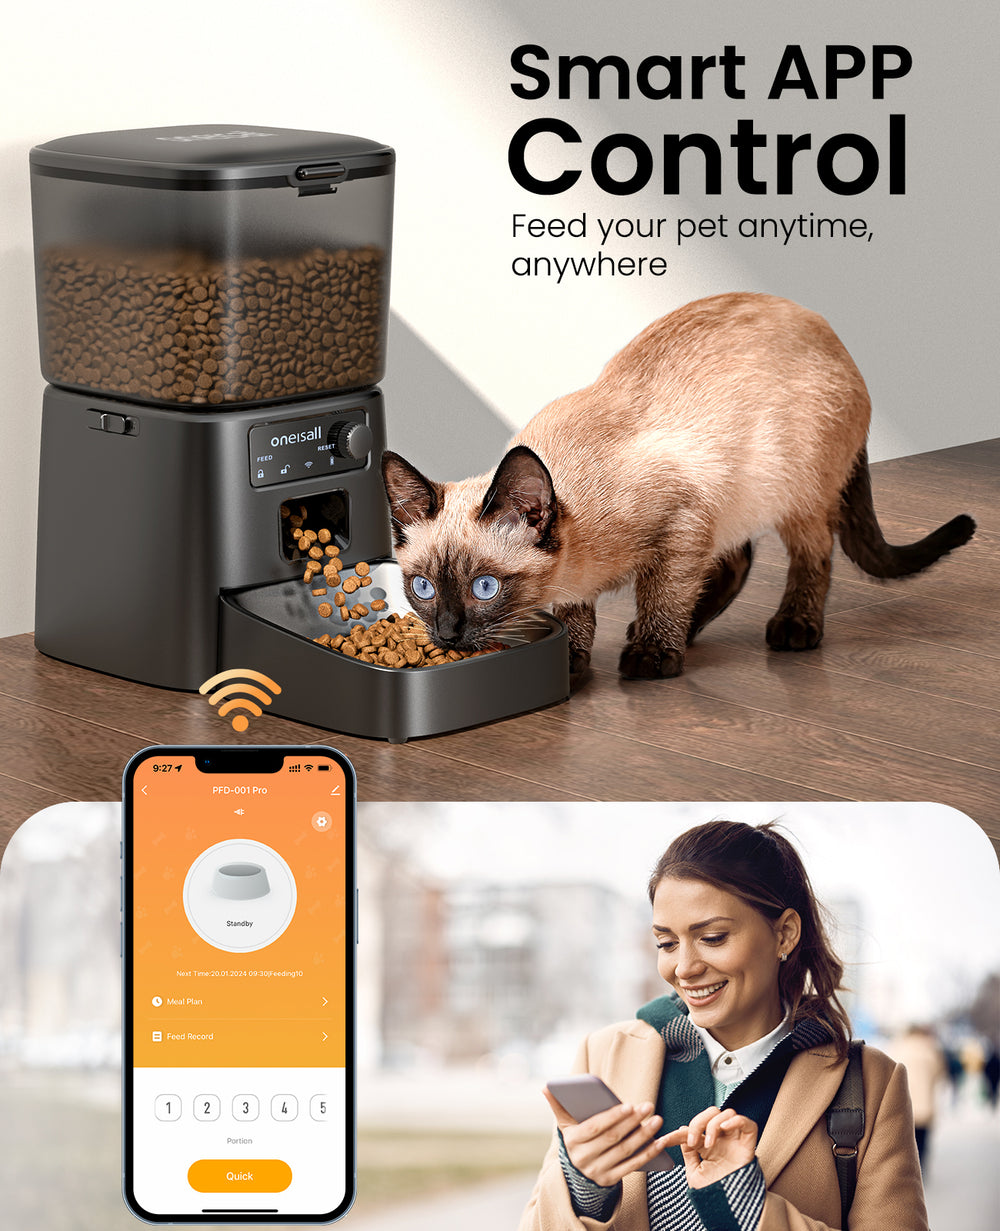 smart app control,feed your pet anytime anywhere